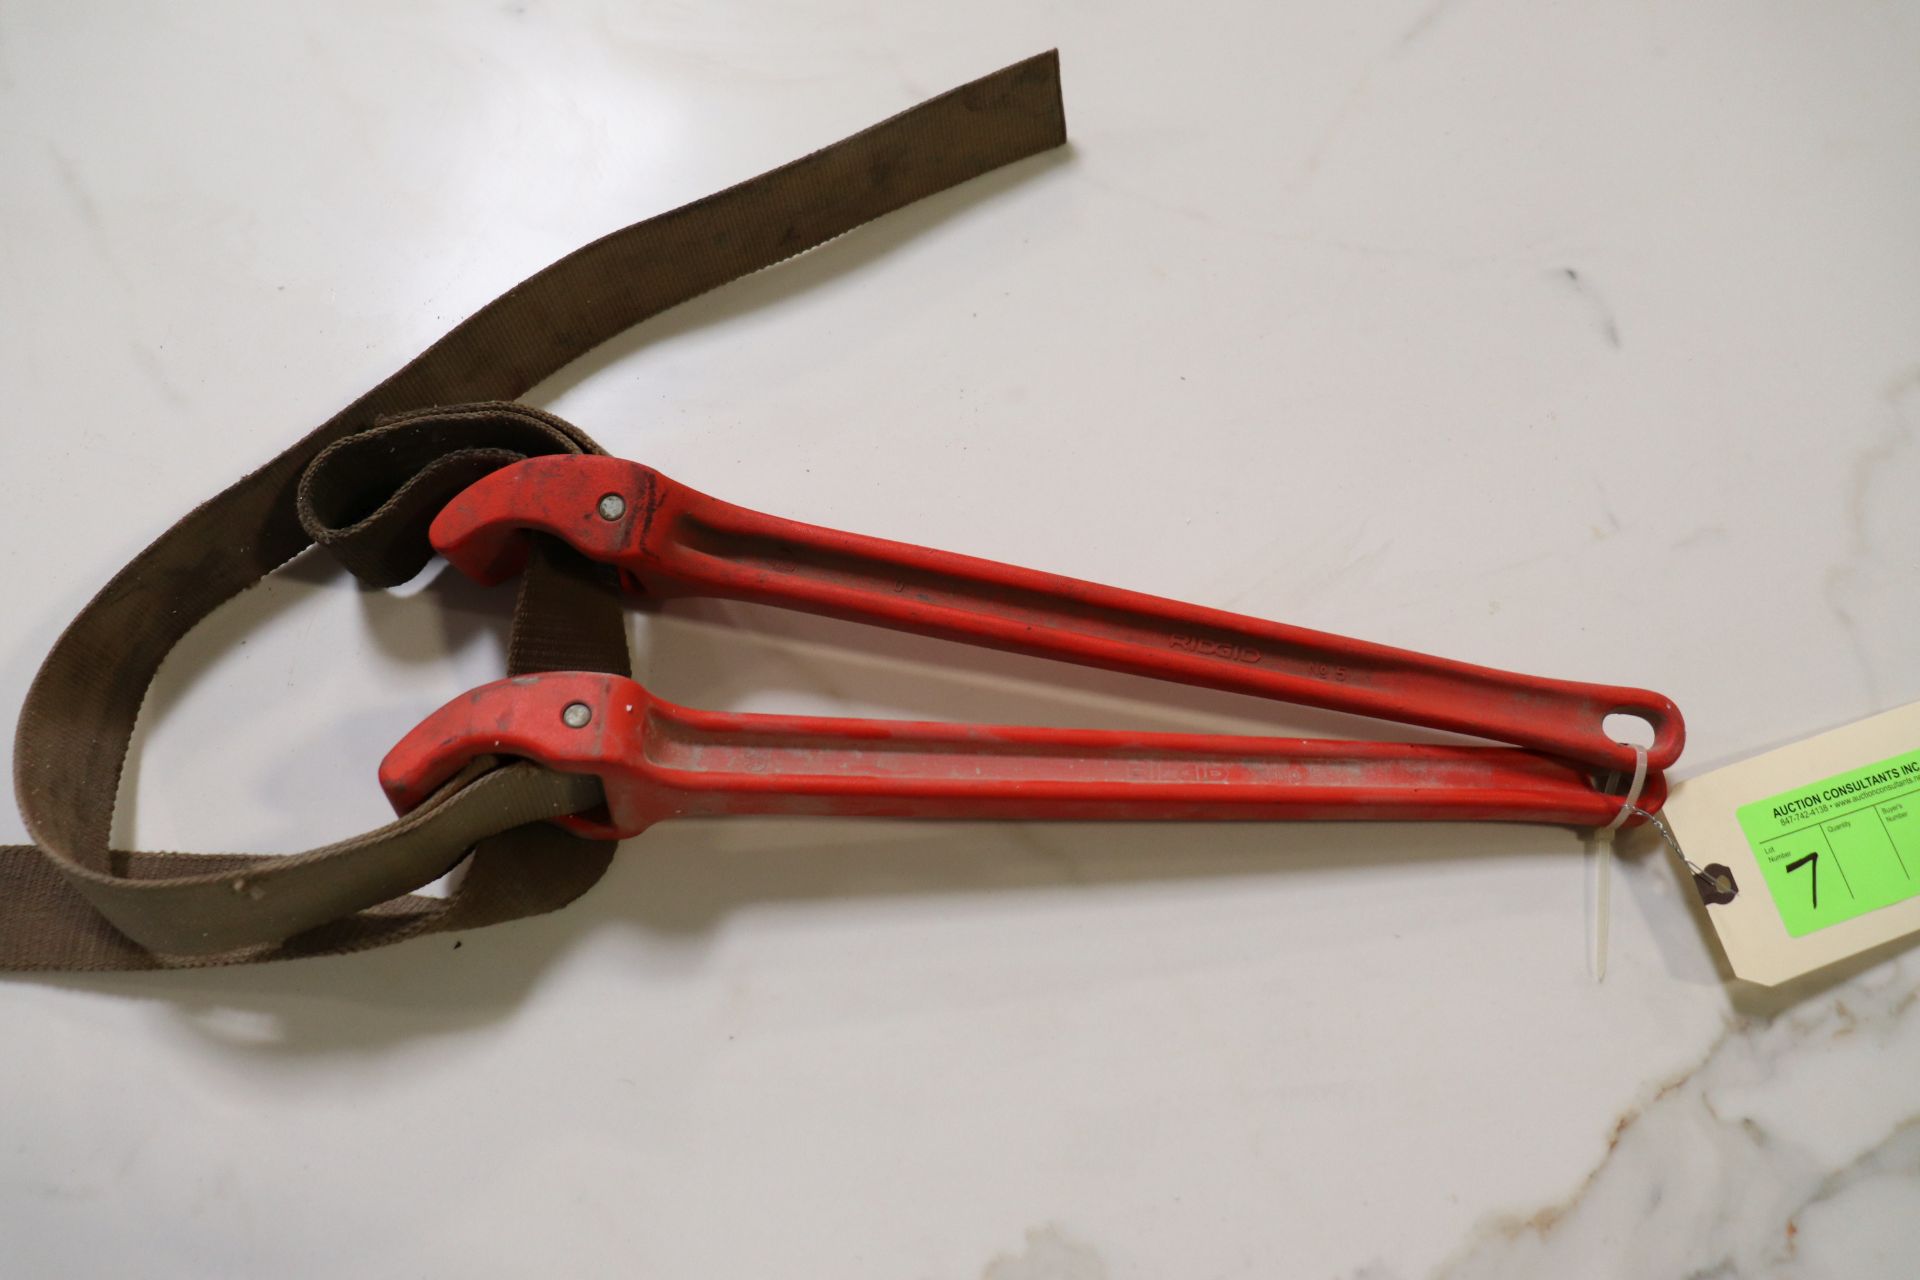 Two Ridgid pipe wrenches